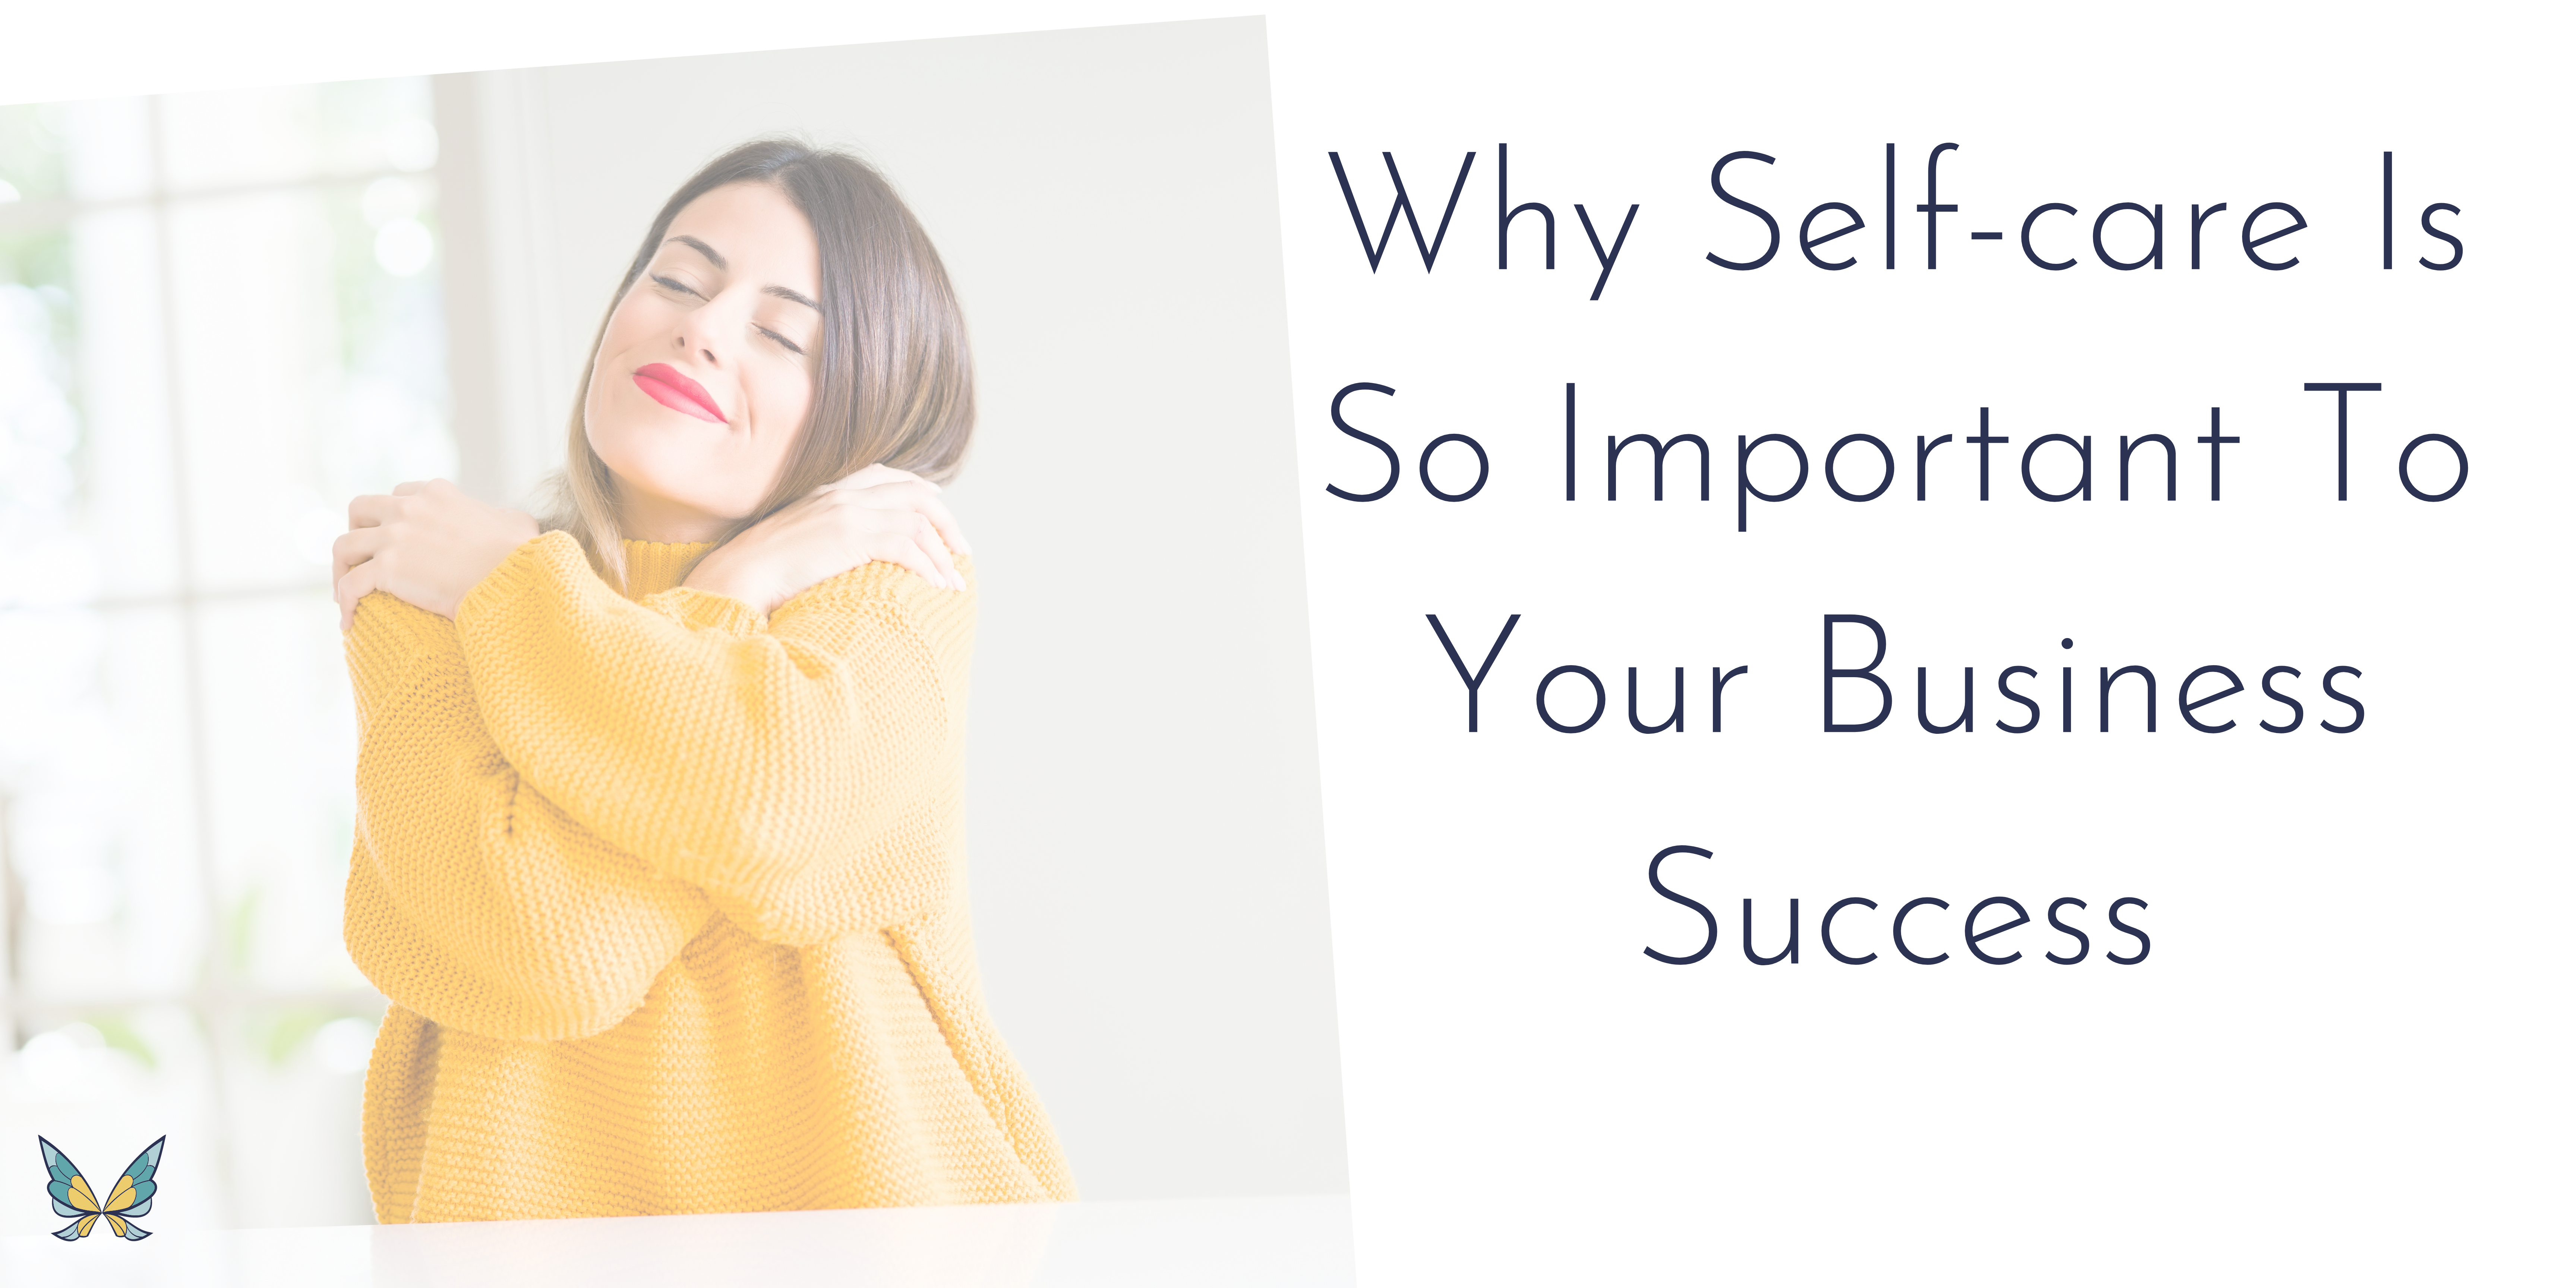 Self-care for business success